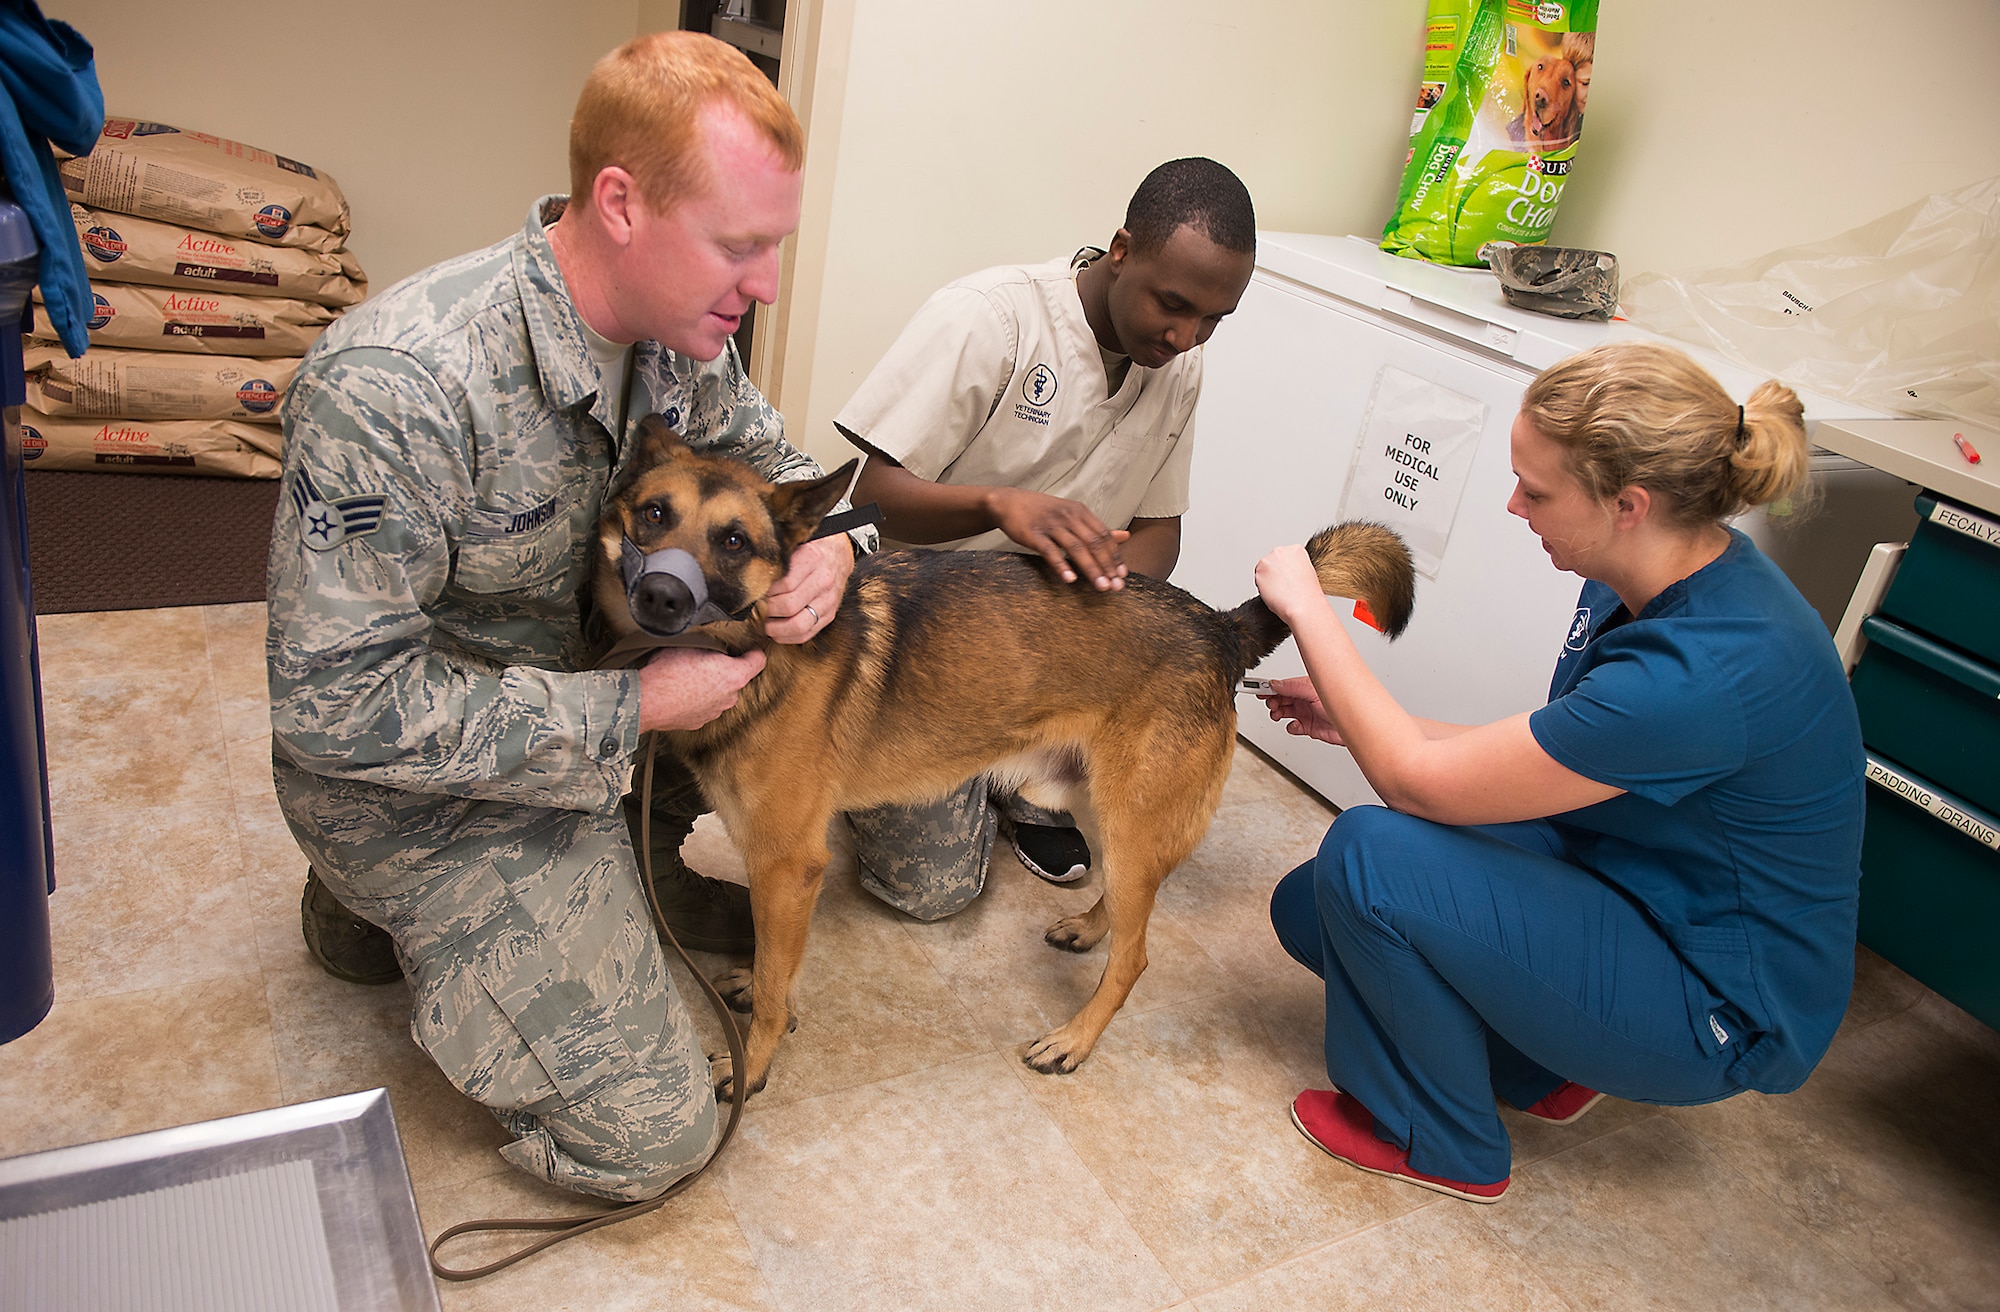 U.S. Air Force Senior Airman Brandon Johnson, 822nd Base Defense Squadron Military Working Dog handler (left), holds MWD Diyi still as U.S. Army Spc. Traveon Holman, 23d Aerospace Medicine Squadron acting NCO in charge of veterinary clinic (center), and Capt. Megan Branham, 23d Aerospace Medicine Squadron officer in charge of veterinary clinic, take Diyi’s temperature at Moody Air Force Base, Ga., March 14, 2014. Following a deployment to Afghanistan in 2012, Diyi exhibited aggression towards Johnson and other symptoms resulting in a diagnosis of canine post traumatic stress disorder. (U.S. Air Force photo by Senior Airman Tiffany M. Grigg/Released) 